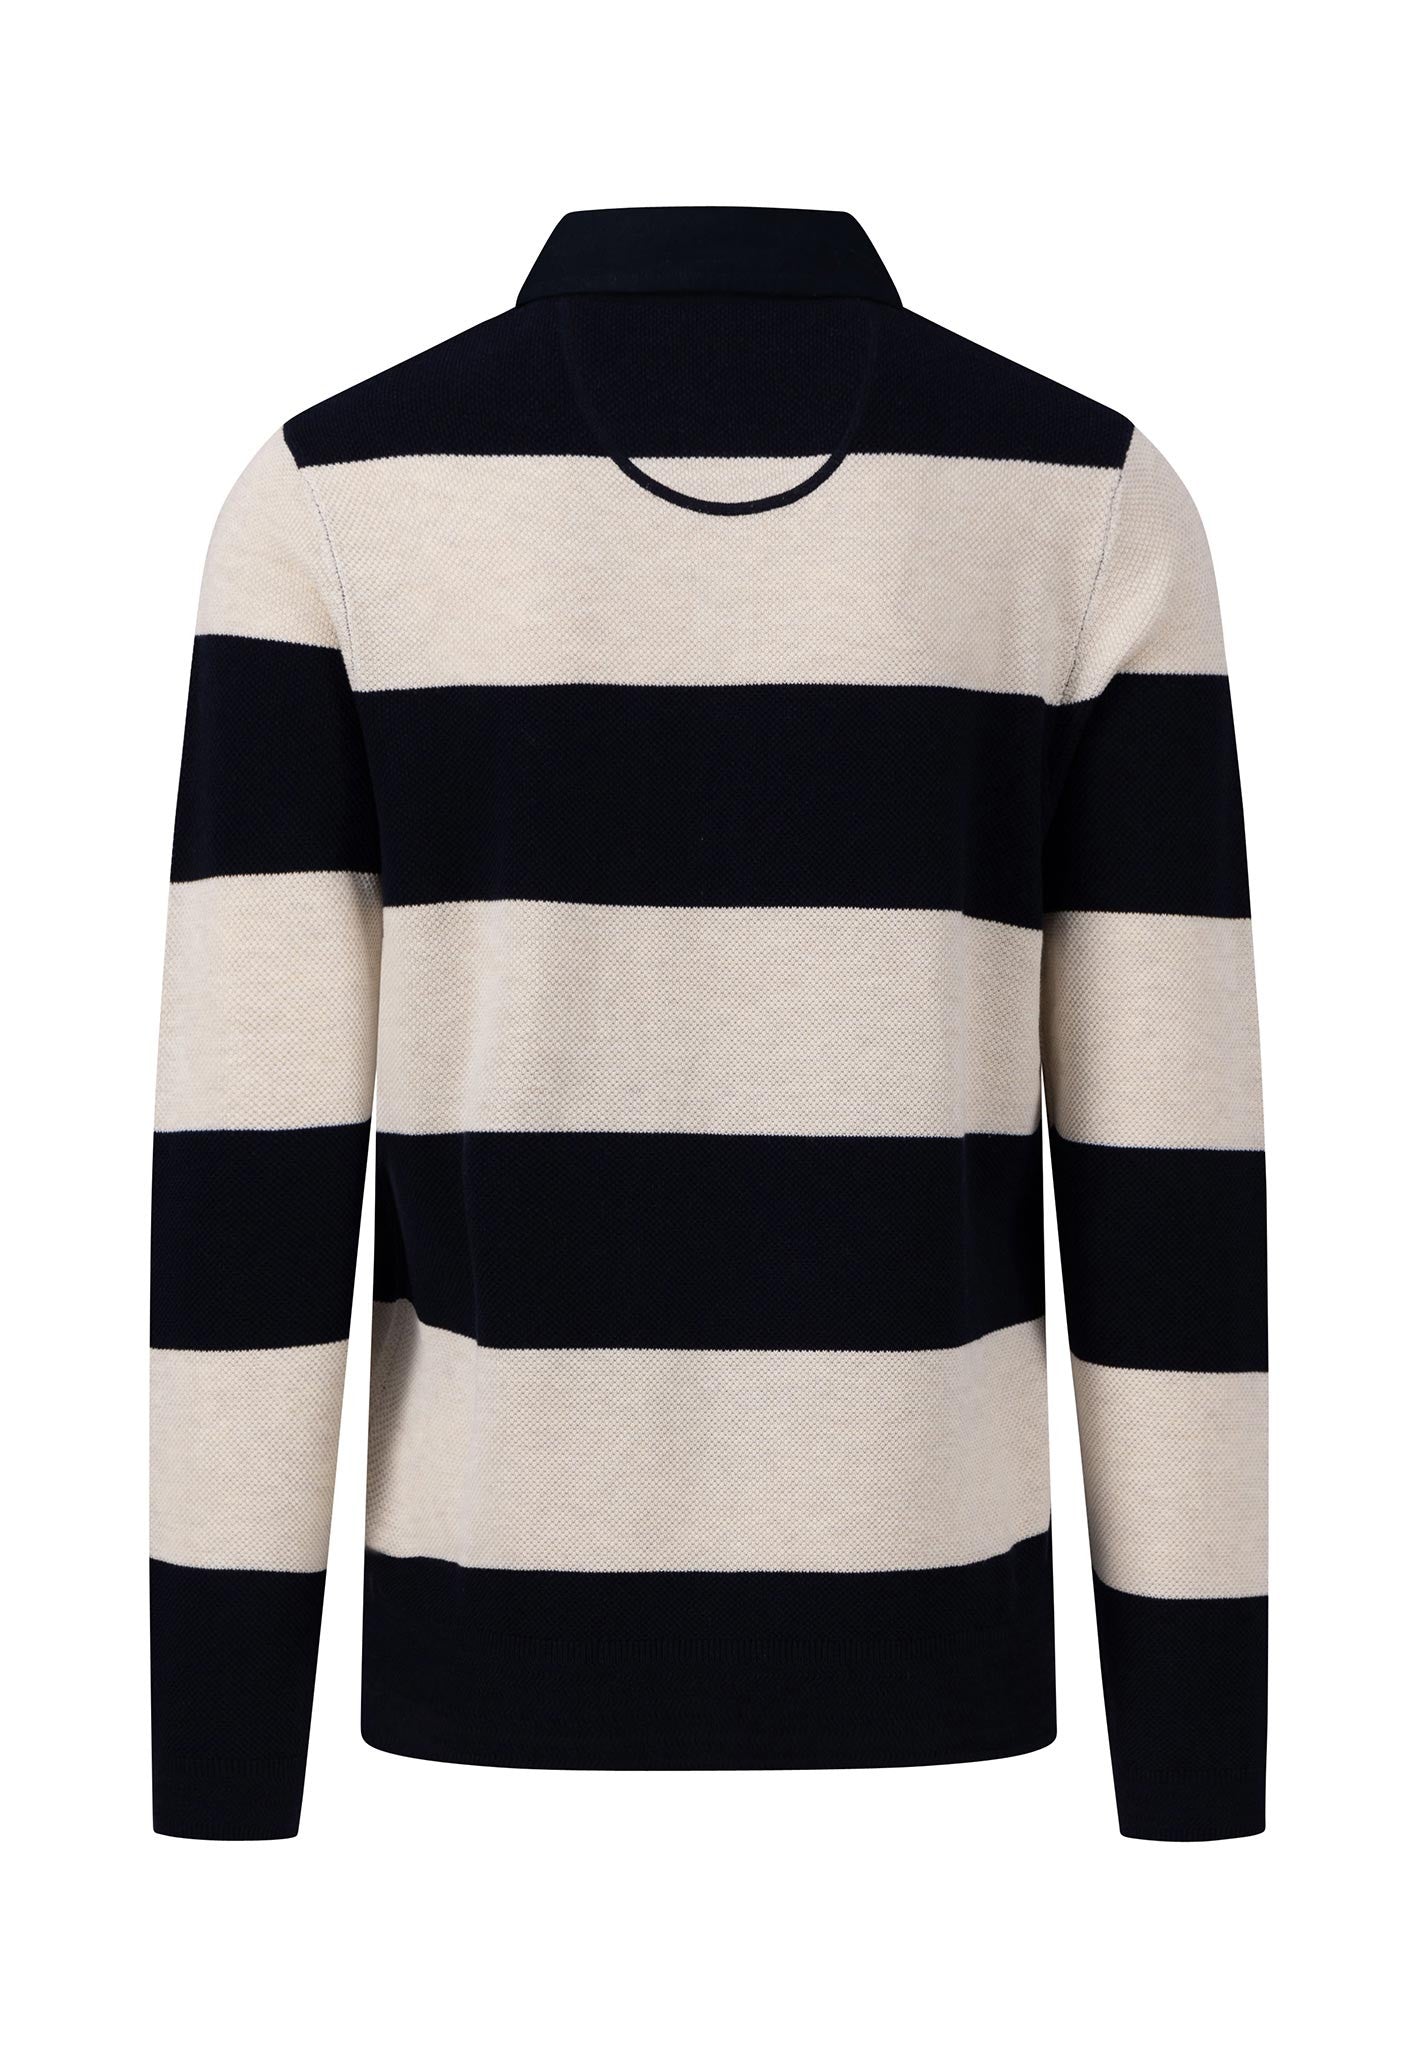 Fynch Hatton Knitted Cotton Rugby Top Navy Stripe